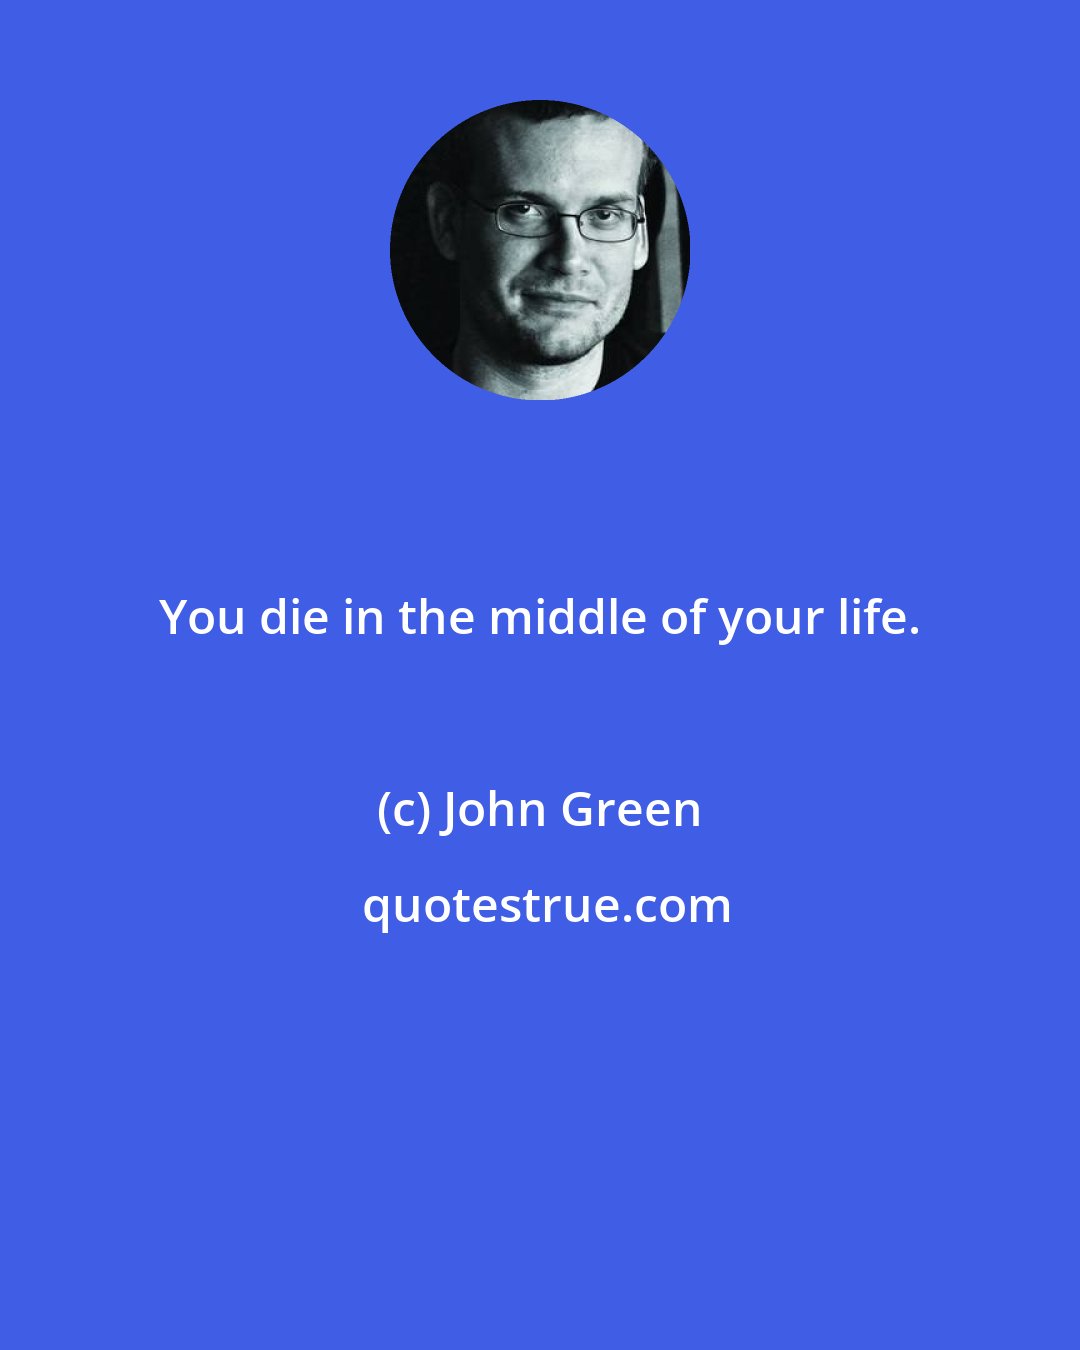 John Green: You die in the middle of your life.